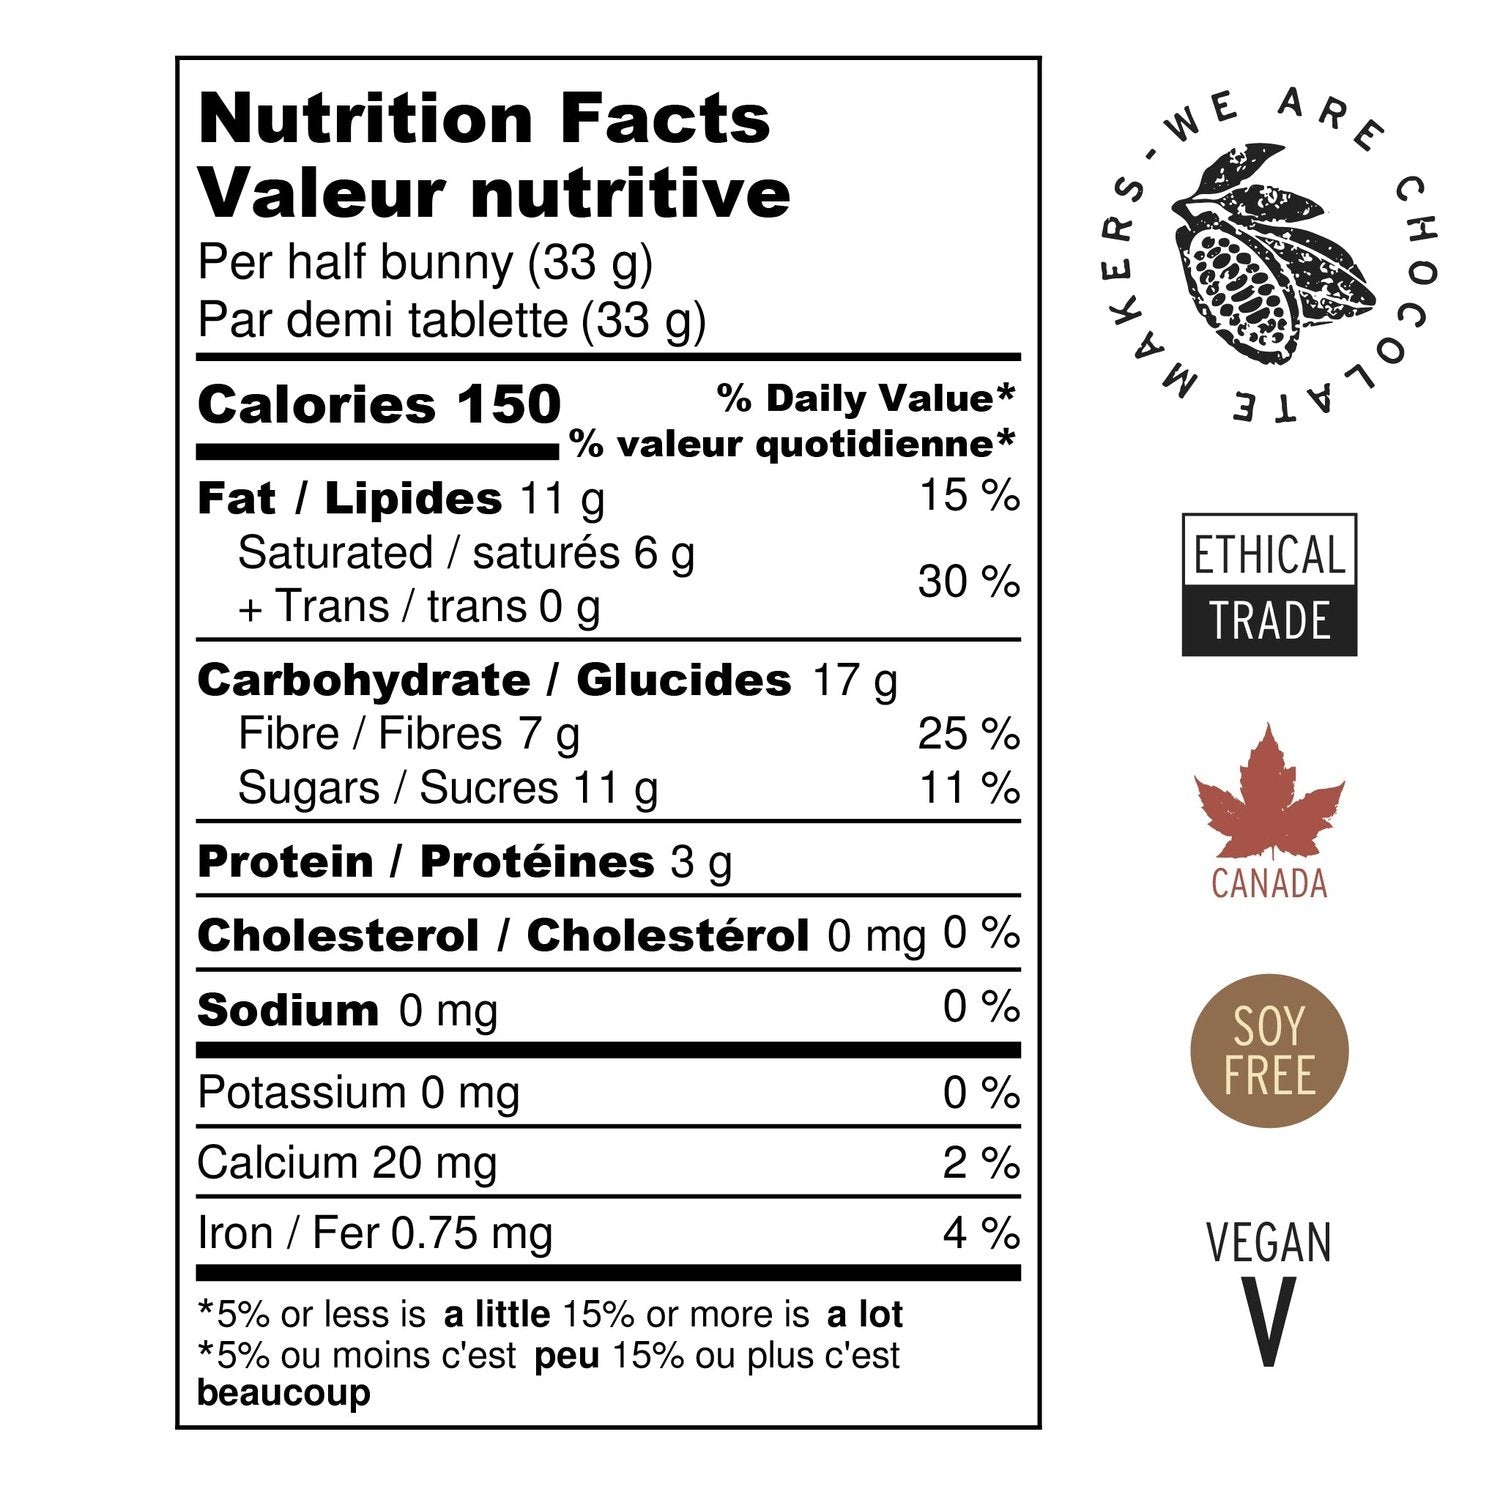 Nutrition Facts for Benny Bunny, Dark Chocolate. Ethical Trade, Made in Canada, Soy Free, Vegan